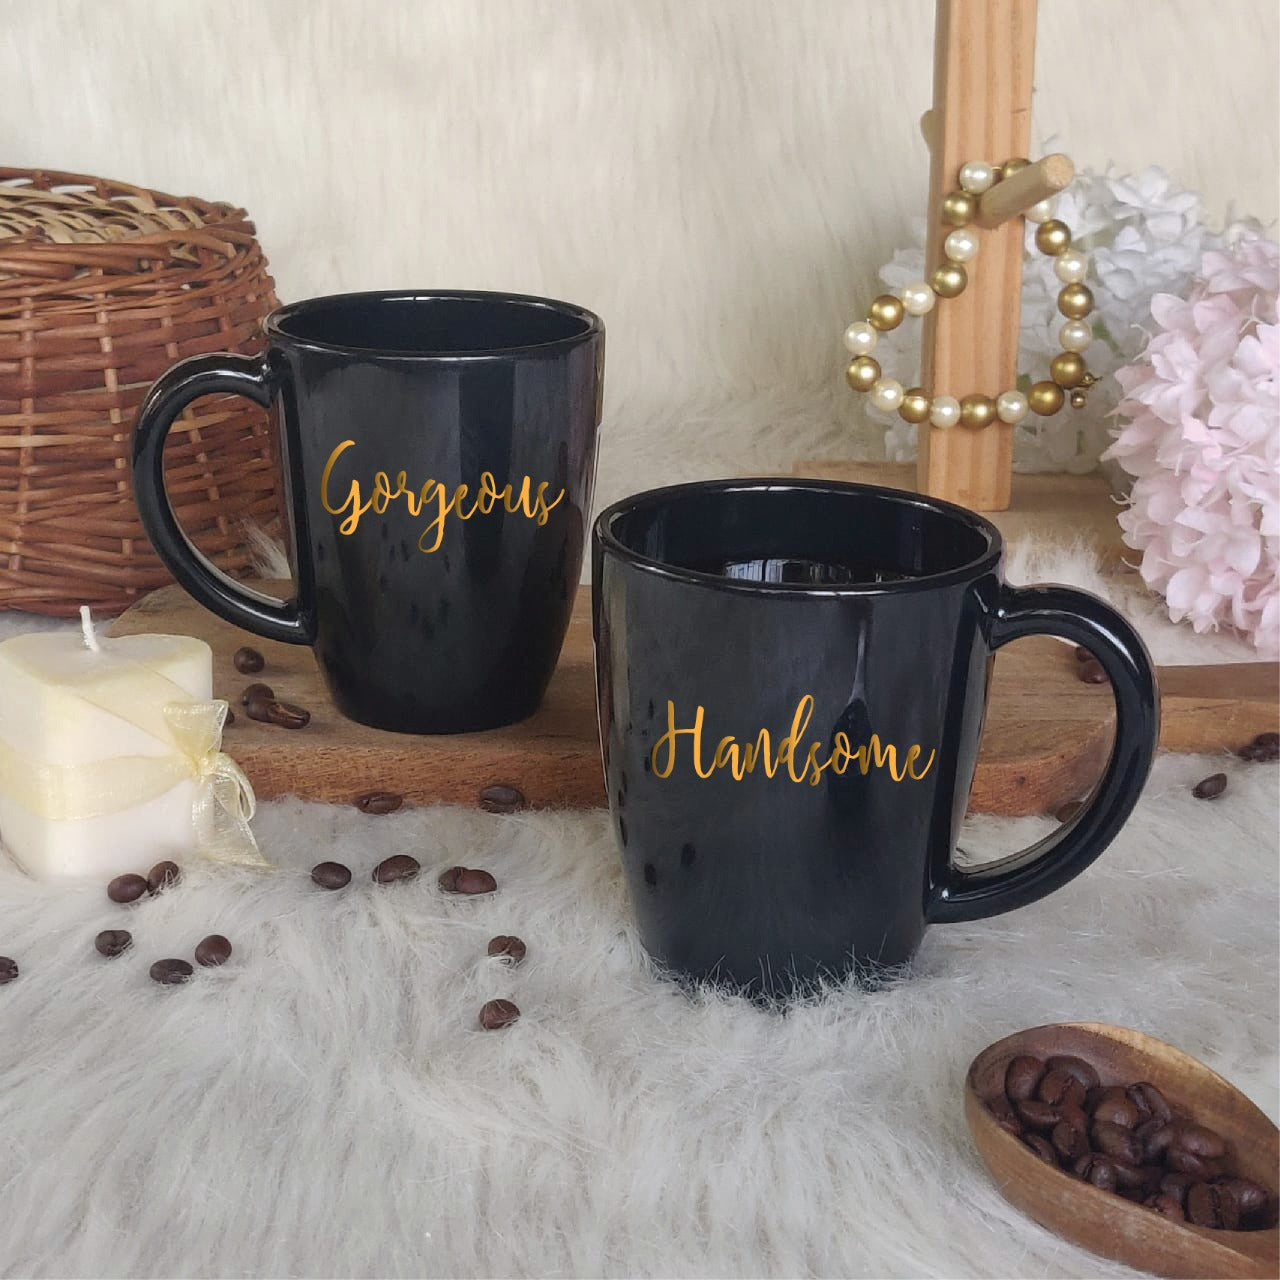 Unbreakable Couple Mugs - Gorgeous and Handsome - Set of 2 - Black